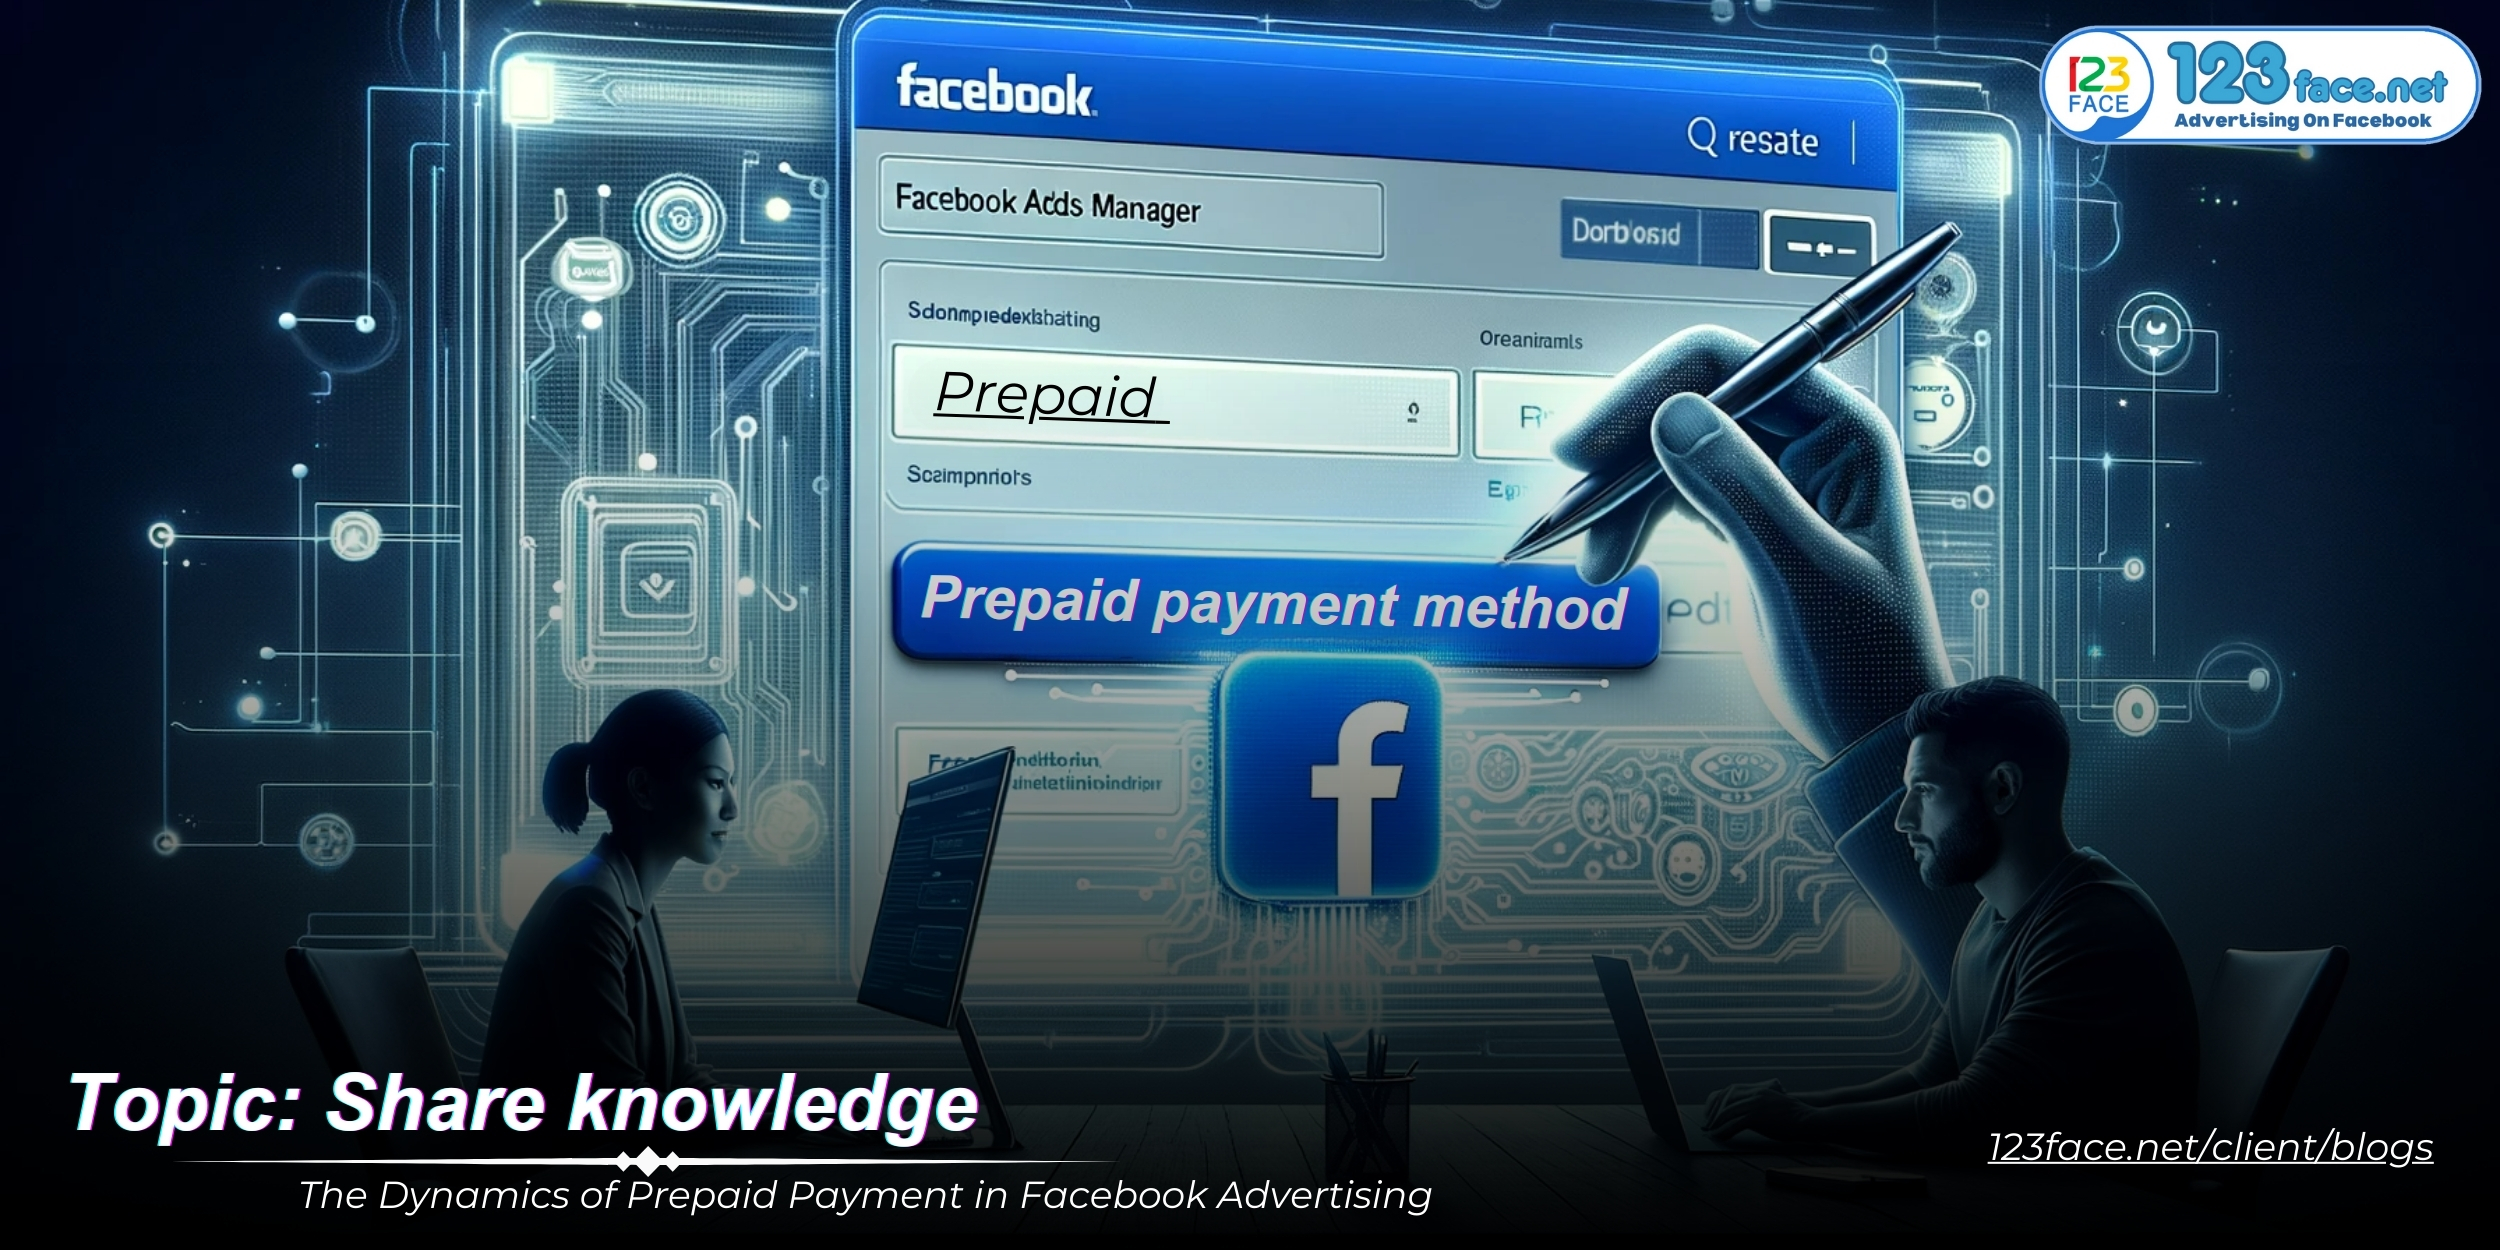 The Dynamics of Prepaid Payment in Facebook Advertising